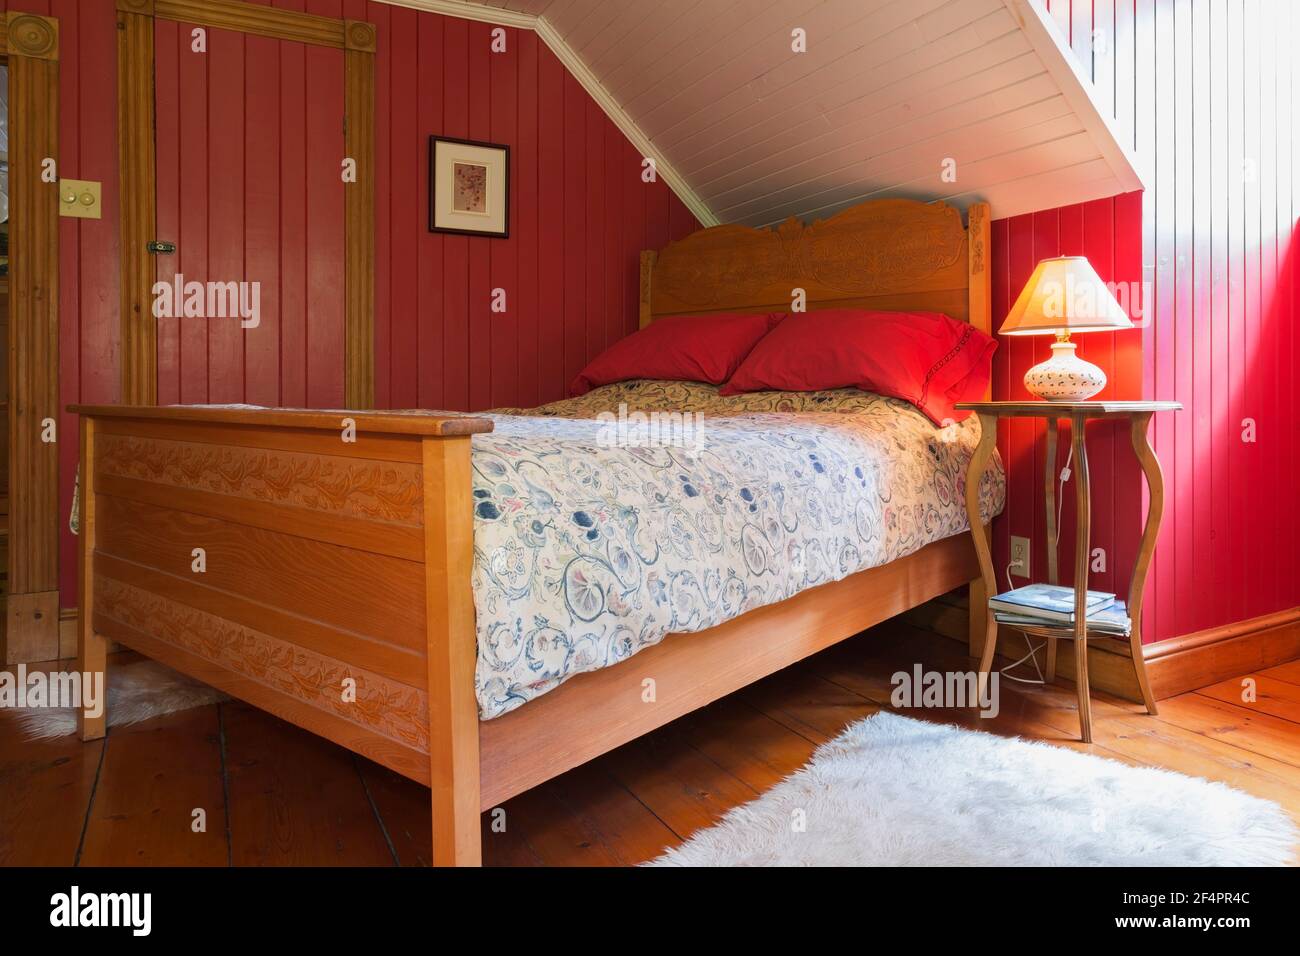 Double bed on elm wood frame with pressed design elements on headboard and footboard, maple wood nightstand and red and white painted guest bedroom Stock Photo